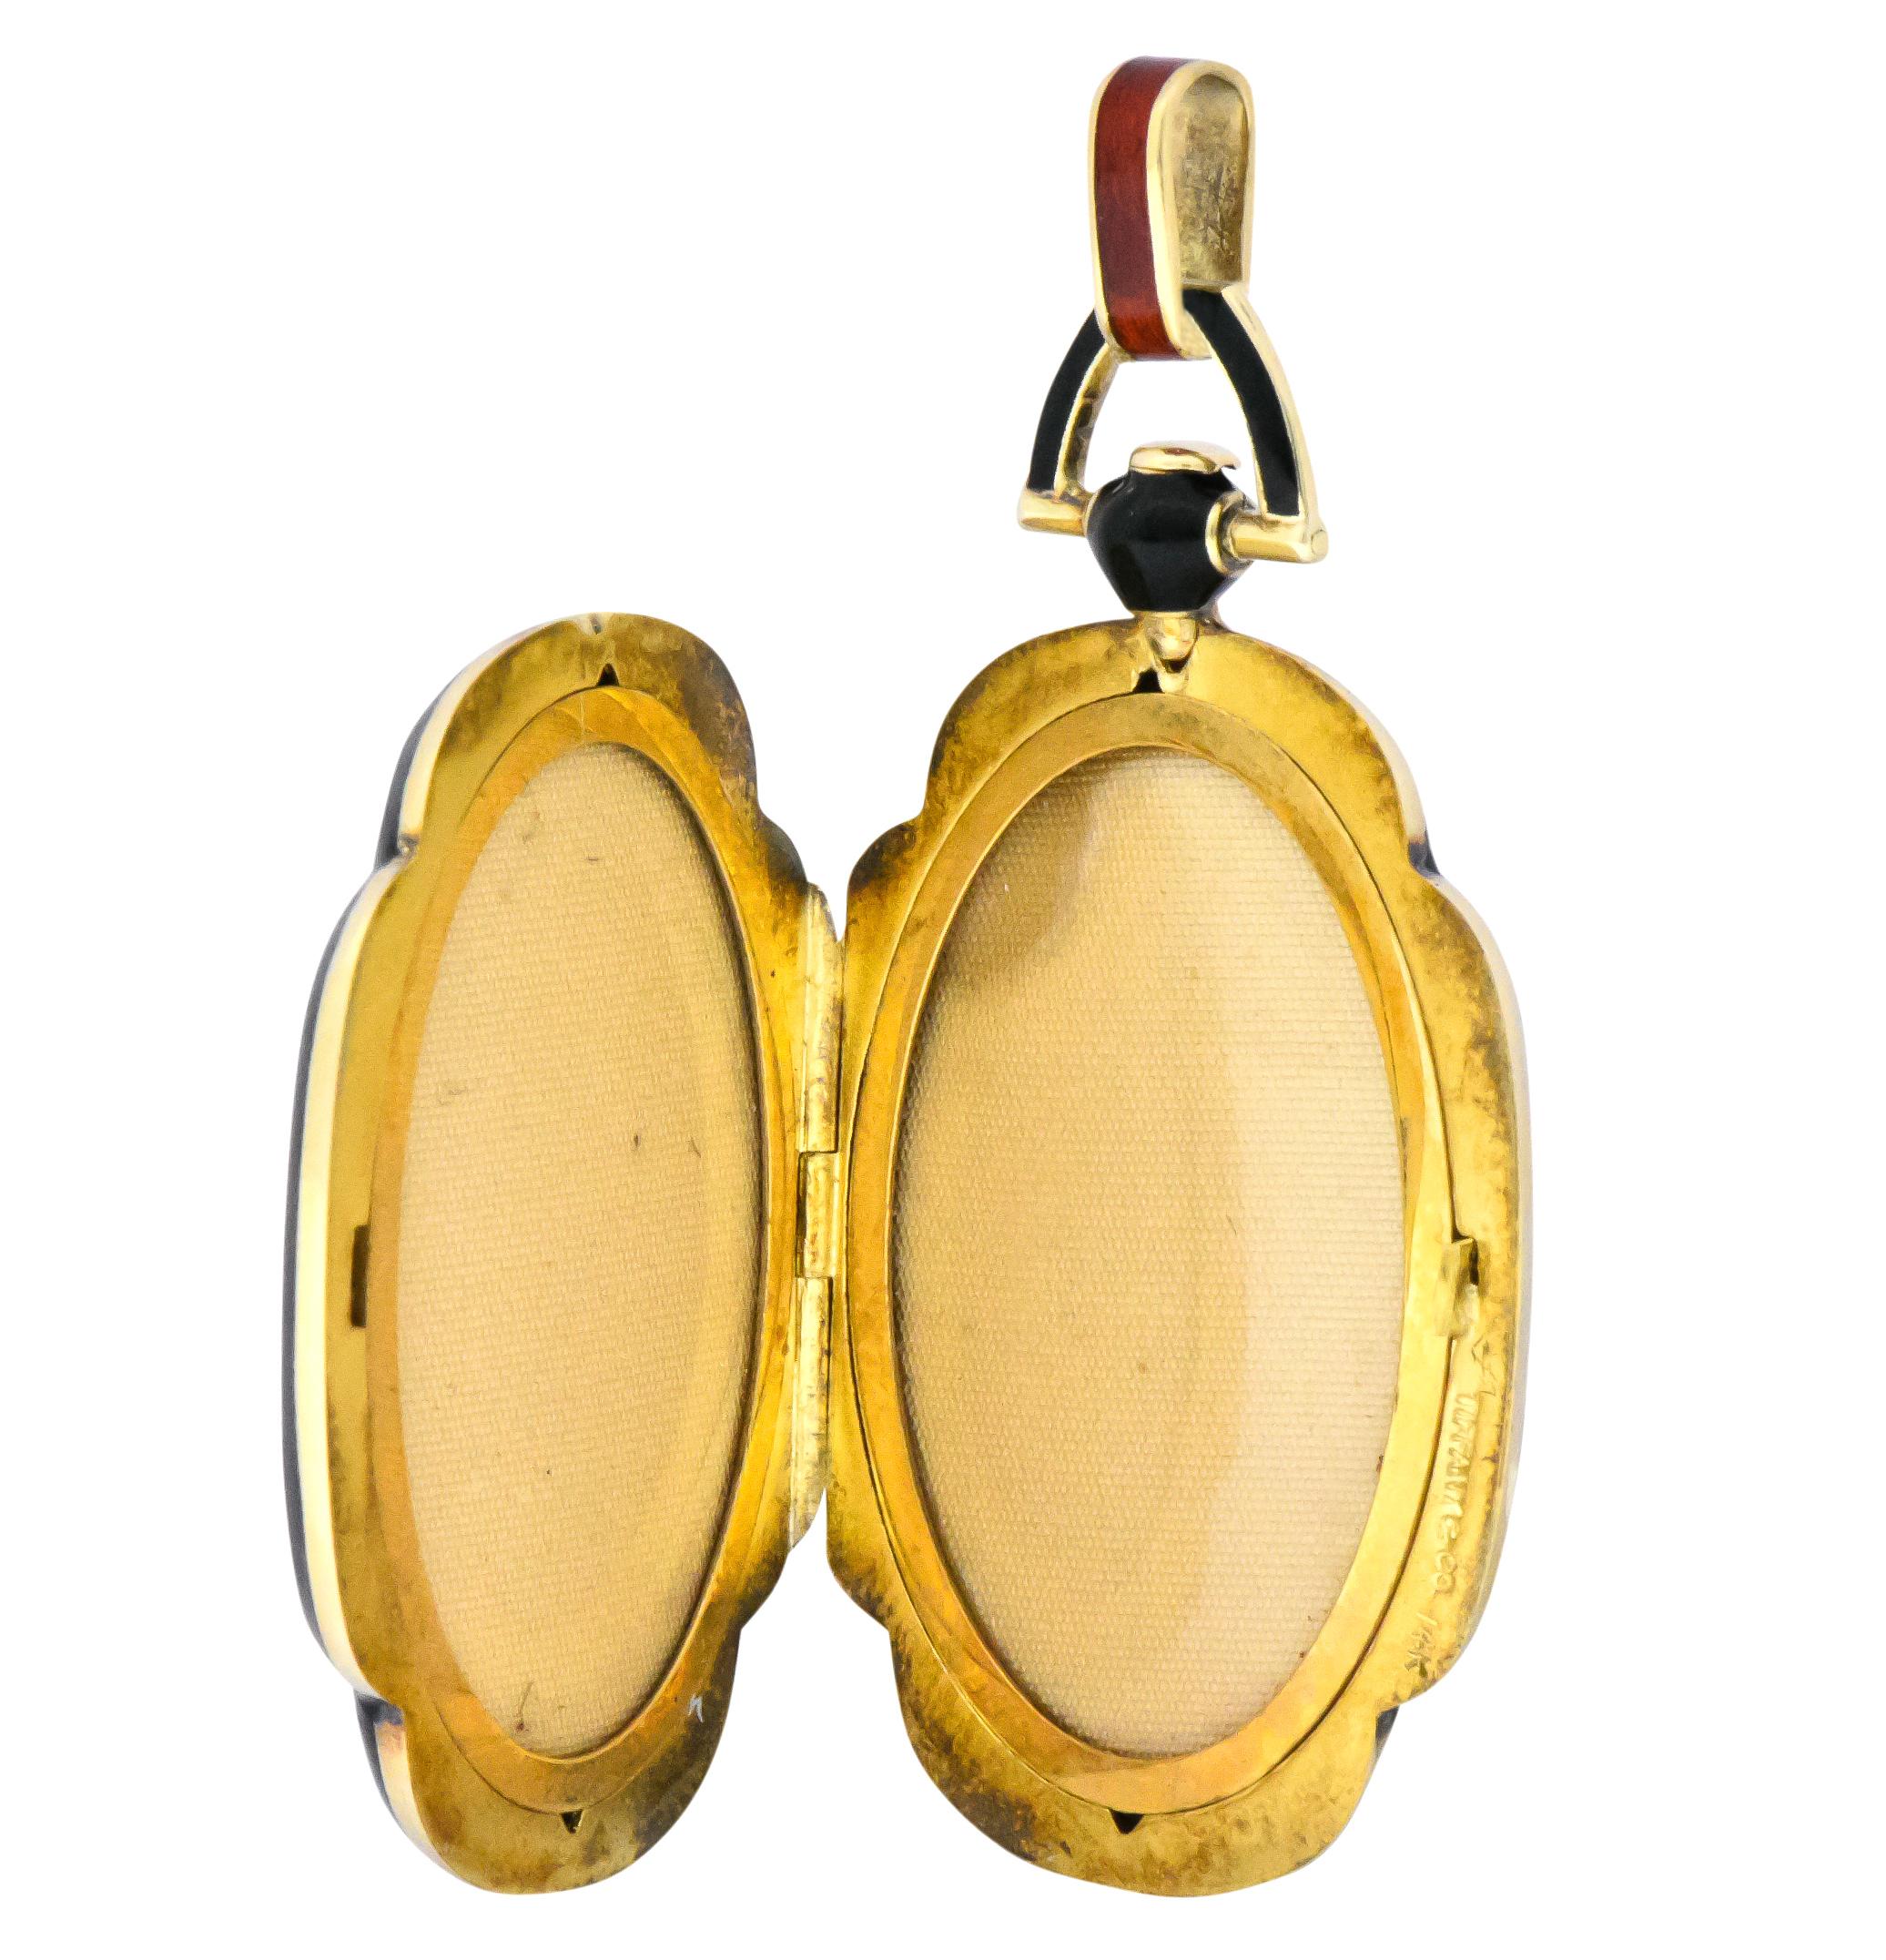 Featuring striking deep orange guilloché enamel, and bale

With a black enamel surround and bale

Opens to reveal an oval frame on each side

Fully signed Tiffany & Co. and stamped 14K

Measures: 2 (incl. bale) x 1 (widest) Inch

Total Weight: 17.2